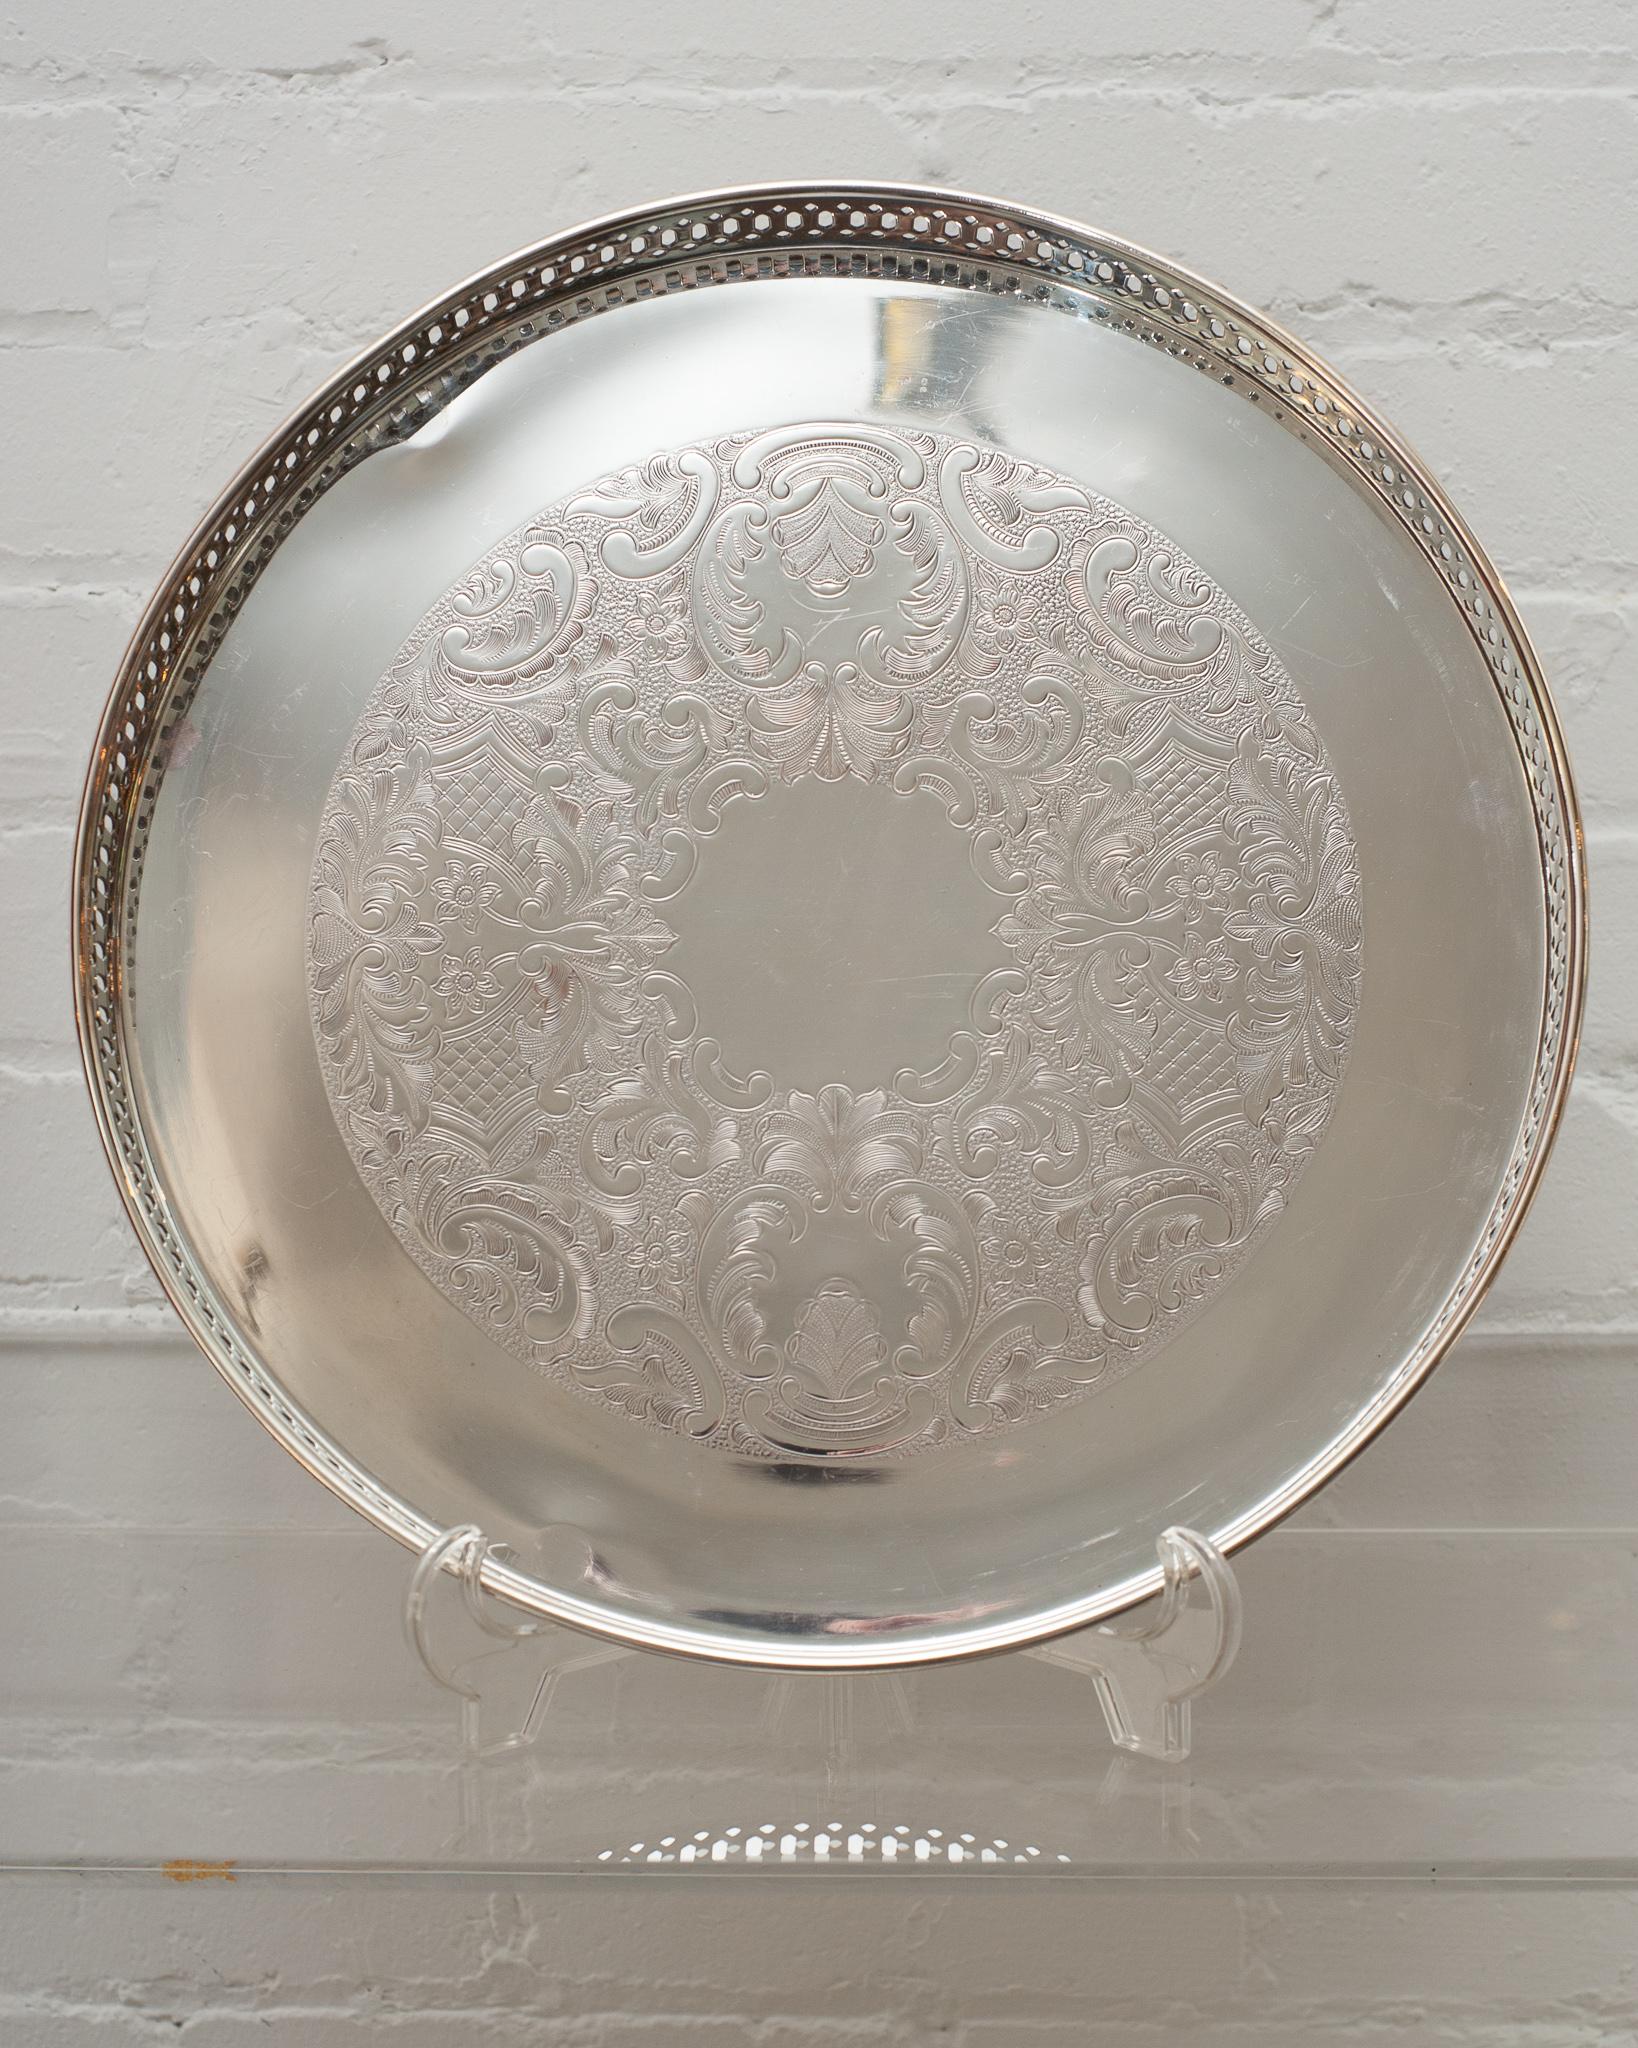 An antique silver plate round serving tray with gallery rim.